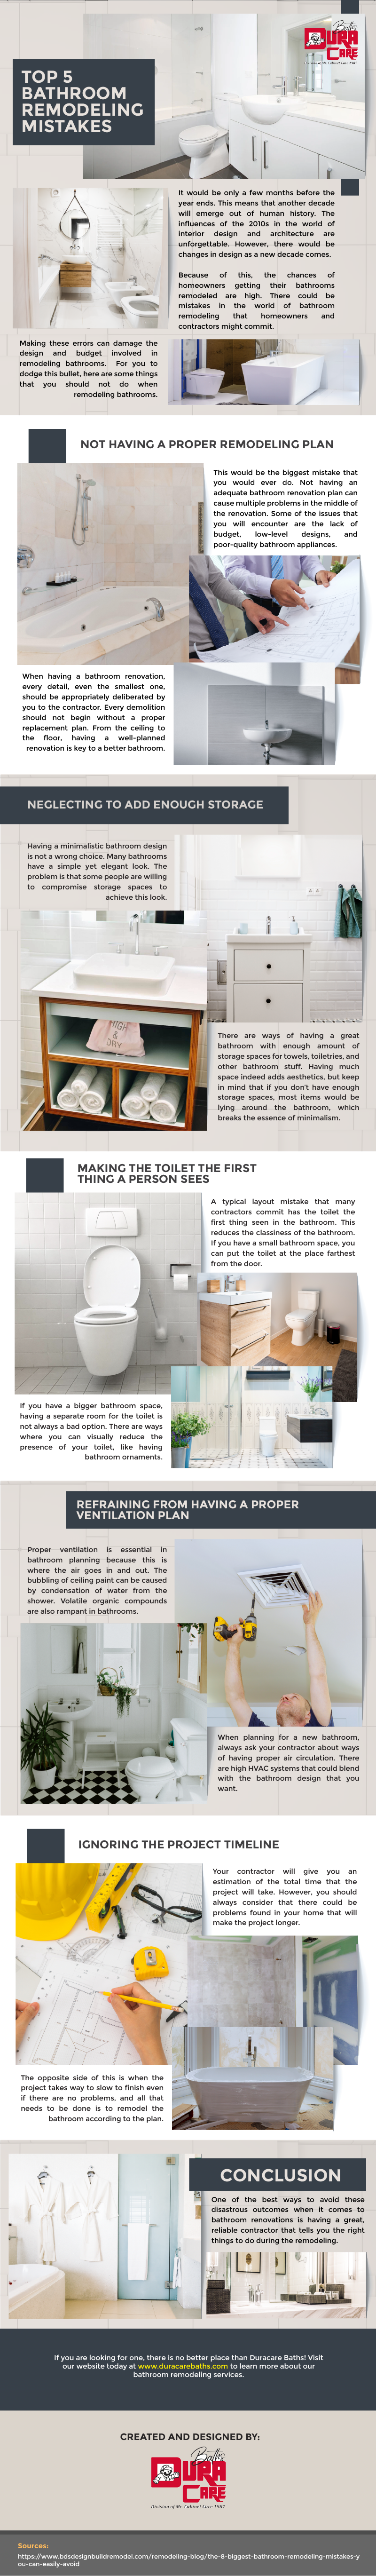 https://www.duracarebaths.com/wp-content/uploads/2019/11/Top-5-Bathroom-Remodeling-Mistakes-01-Copy.png